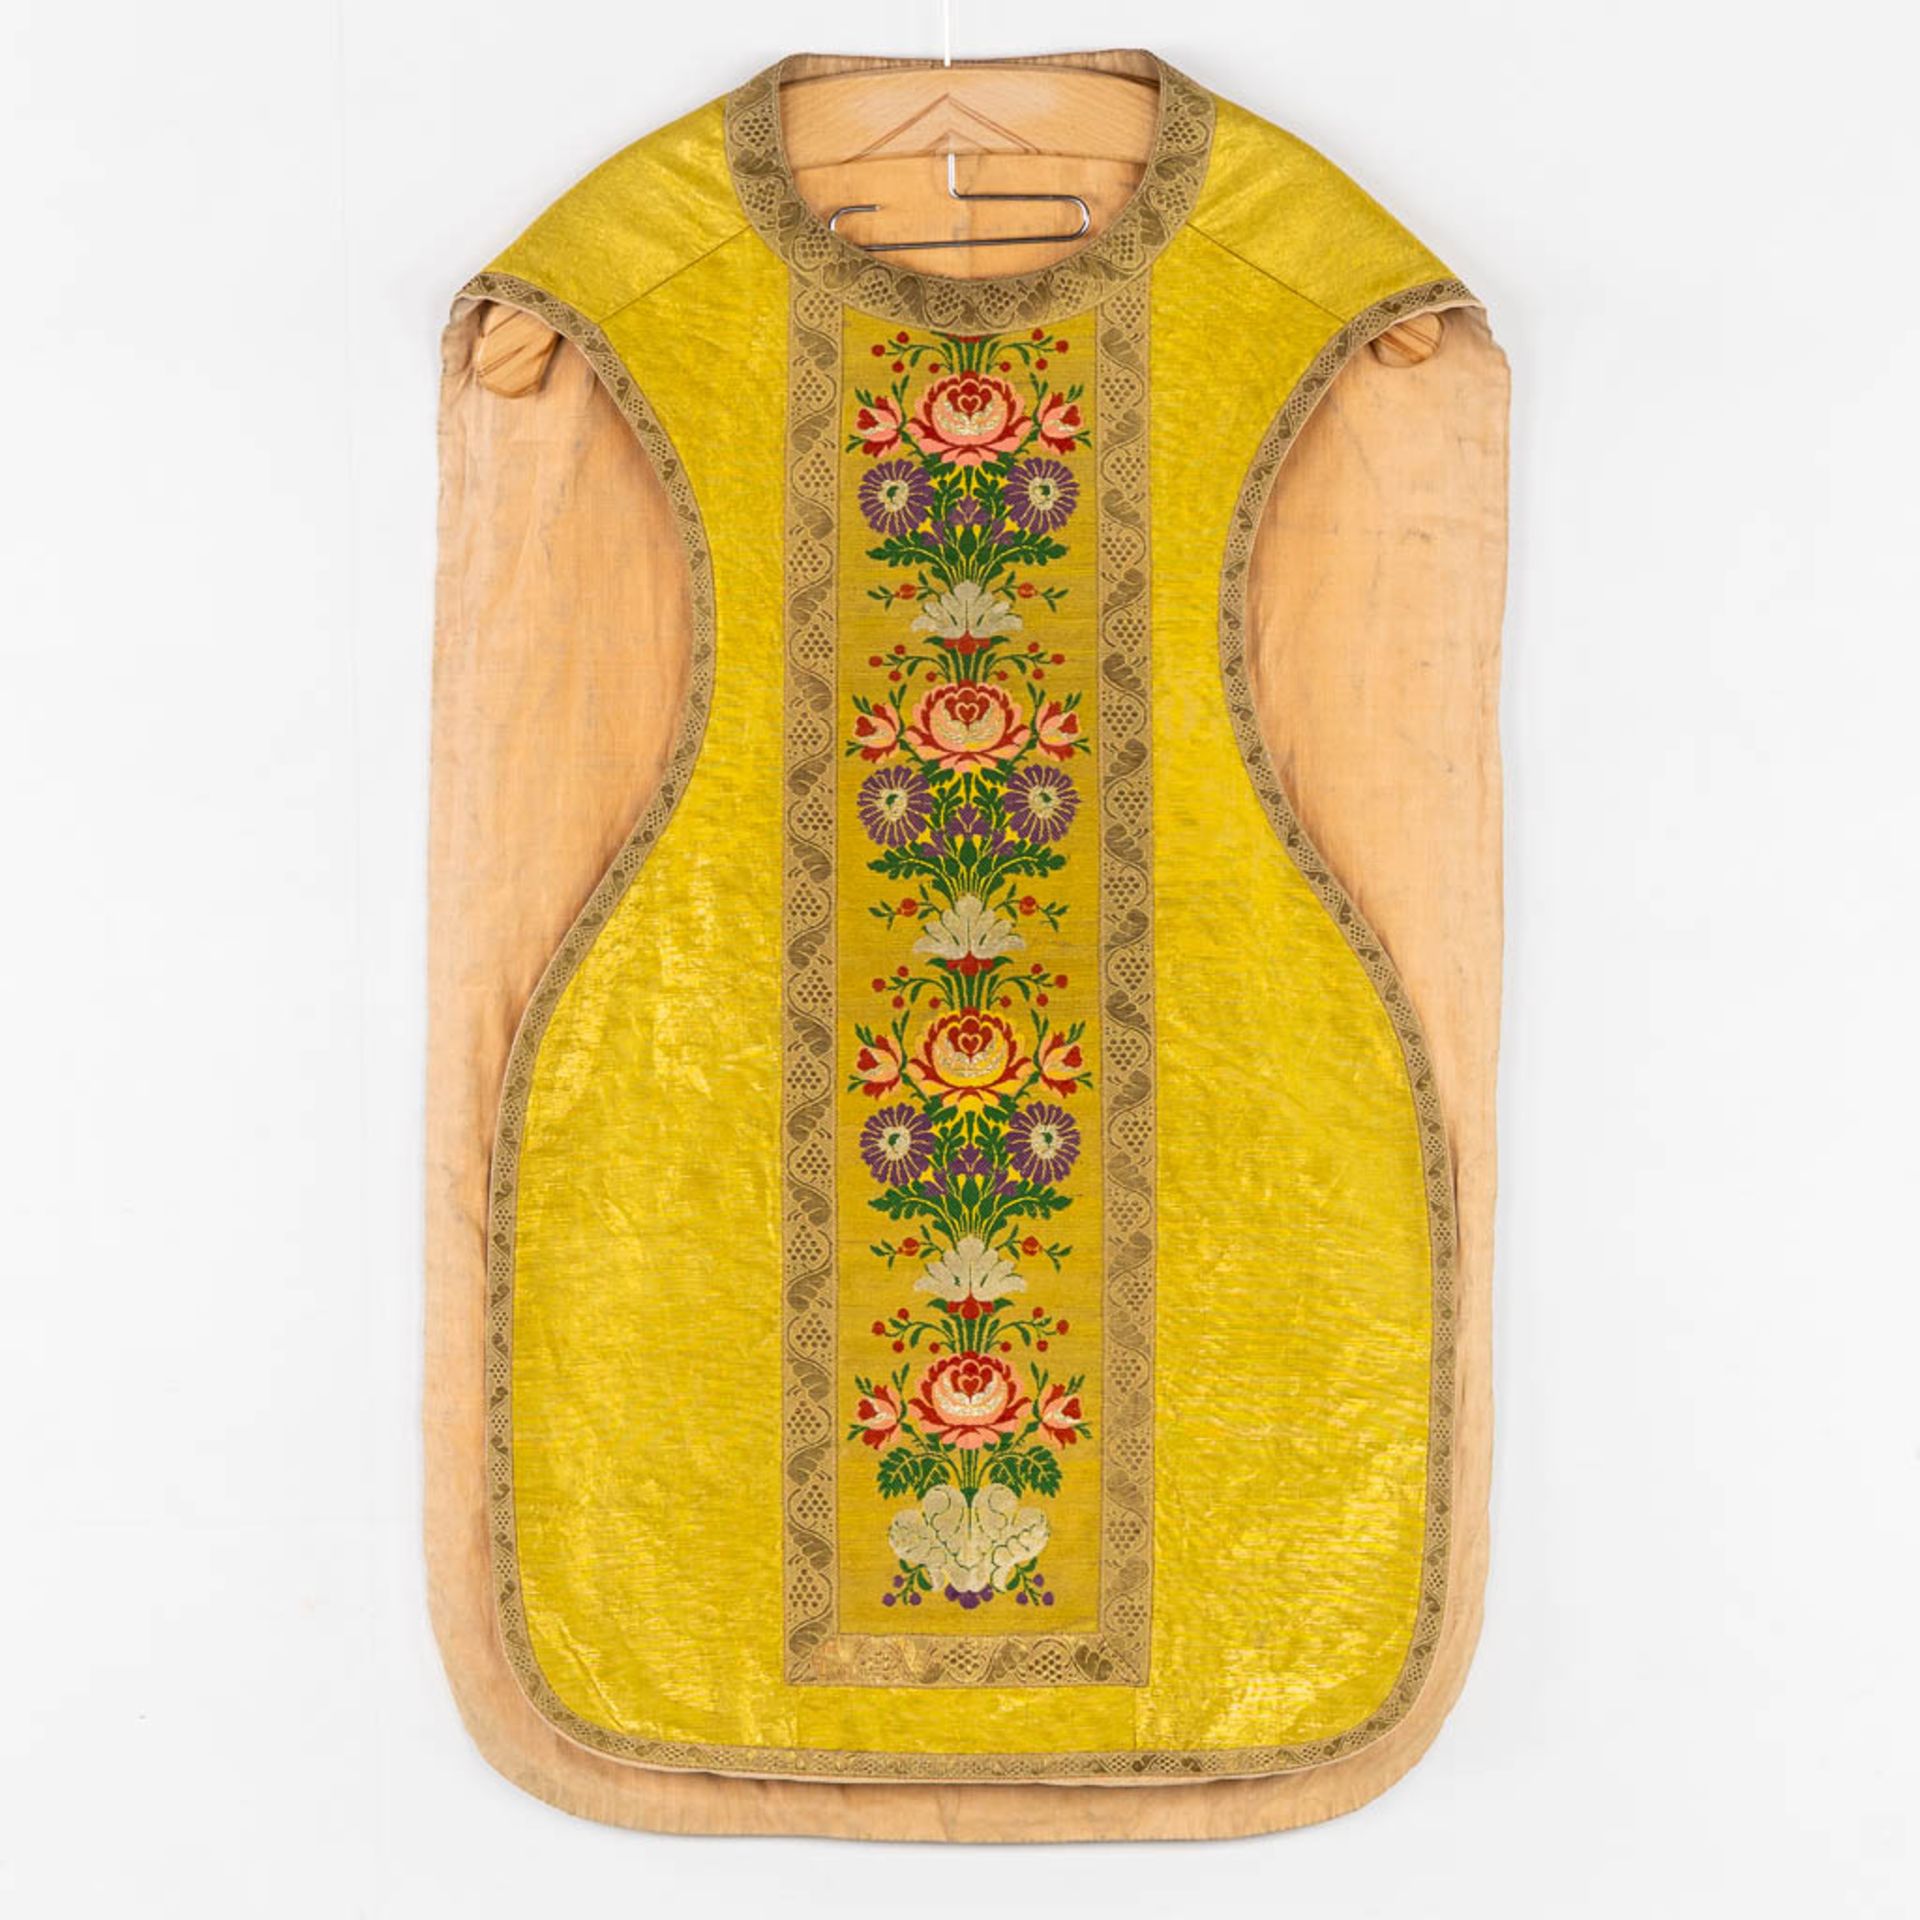 A Humeral Veil and Four Roman Chasubles, embroideries with an IHS and floral decor. - Image 10 of 29